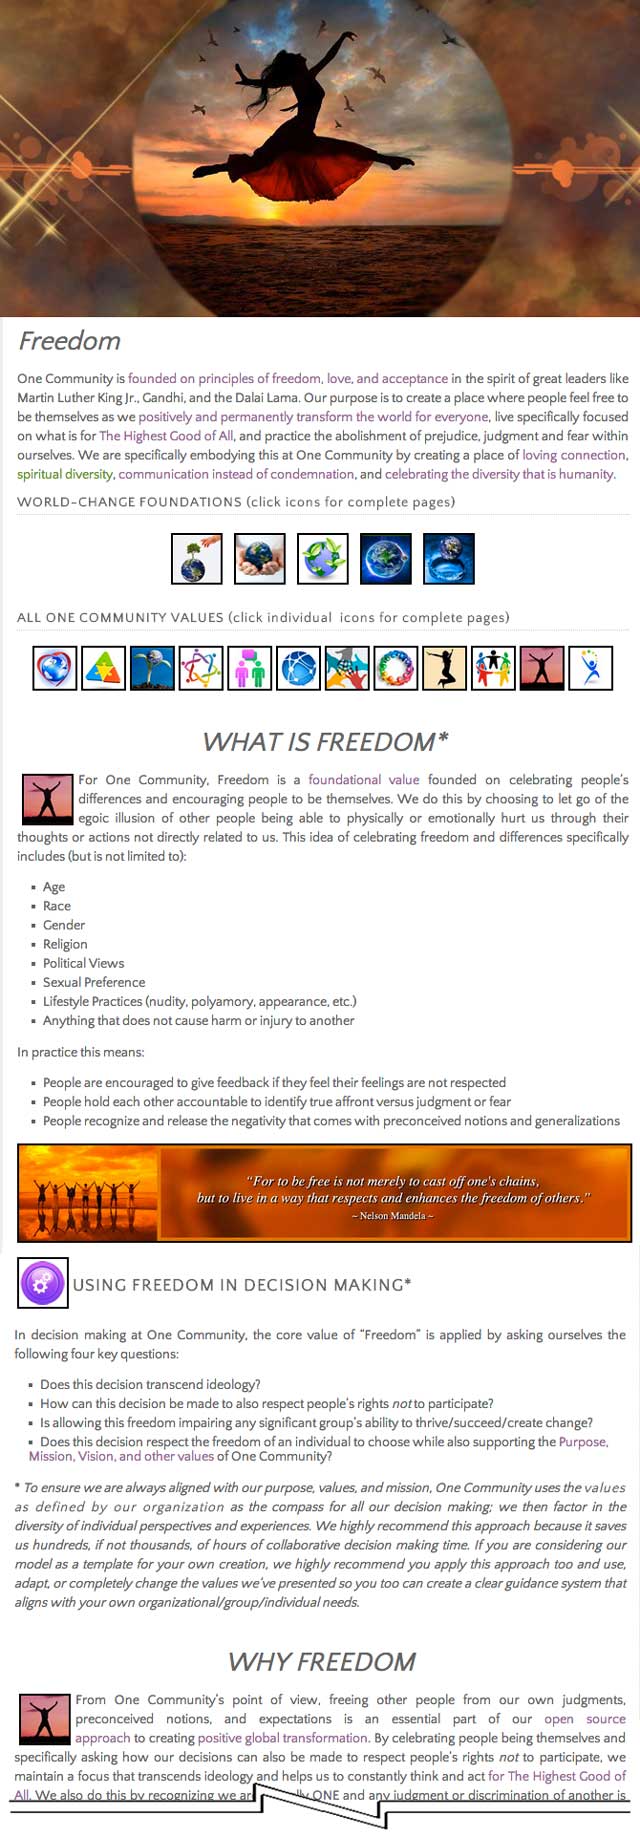 Freedom page, One Community